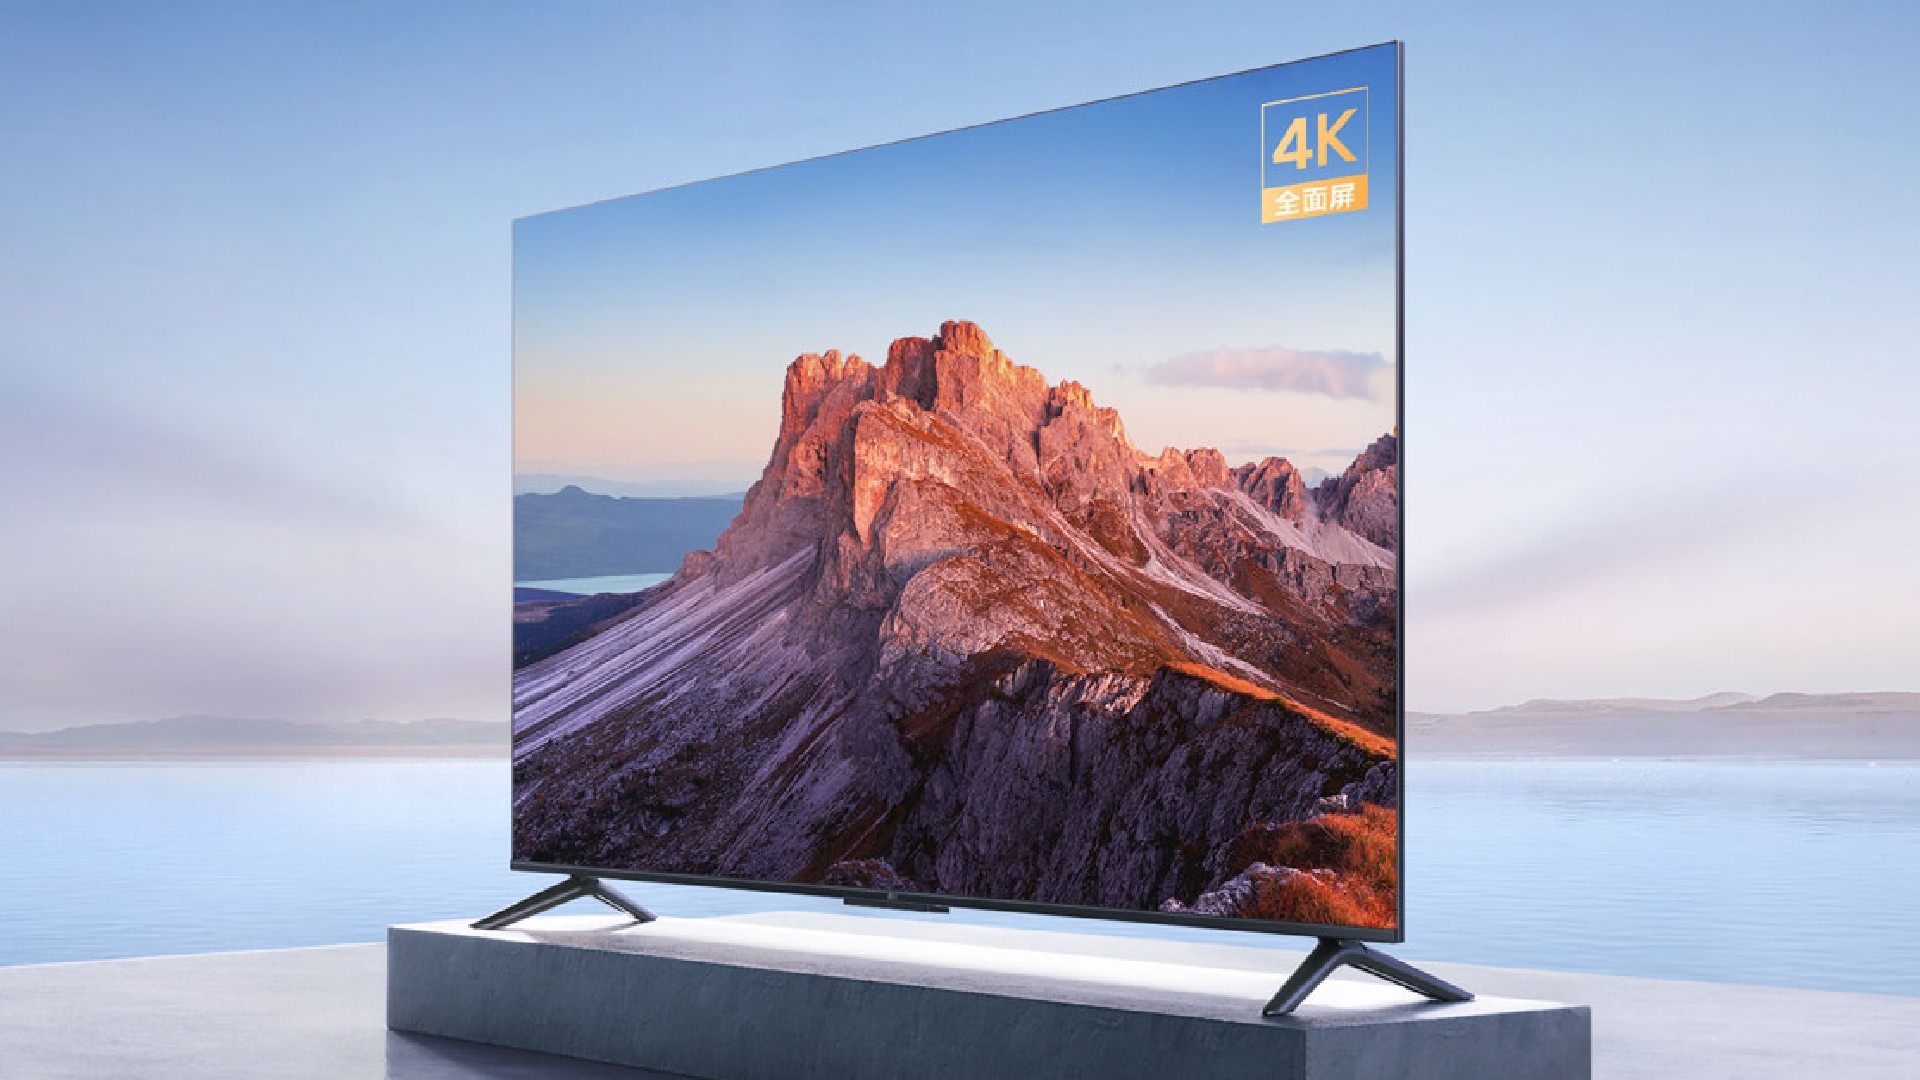 In India, Redmi TVs and Mi TVs are more expensive: but why?